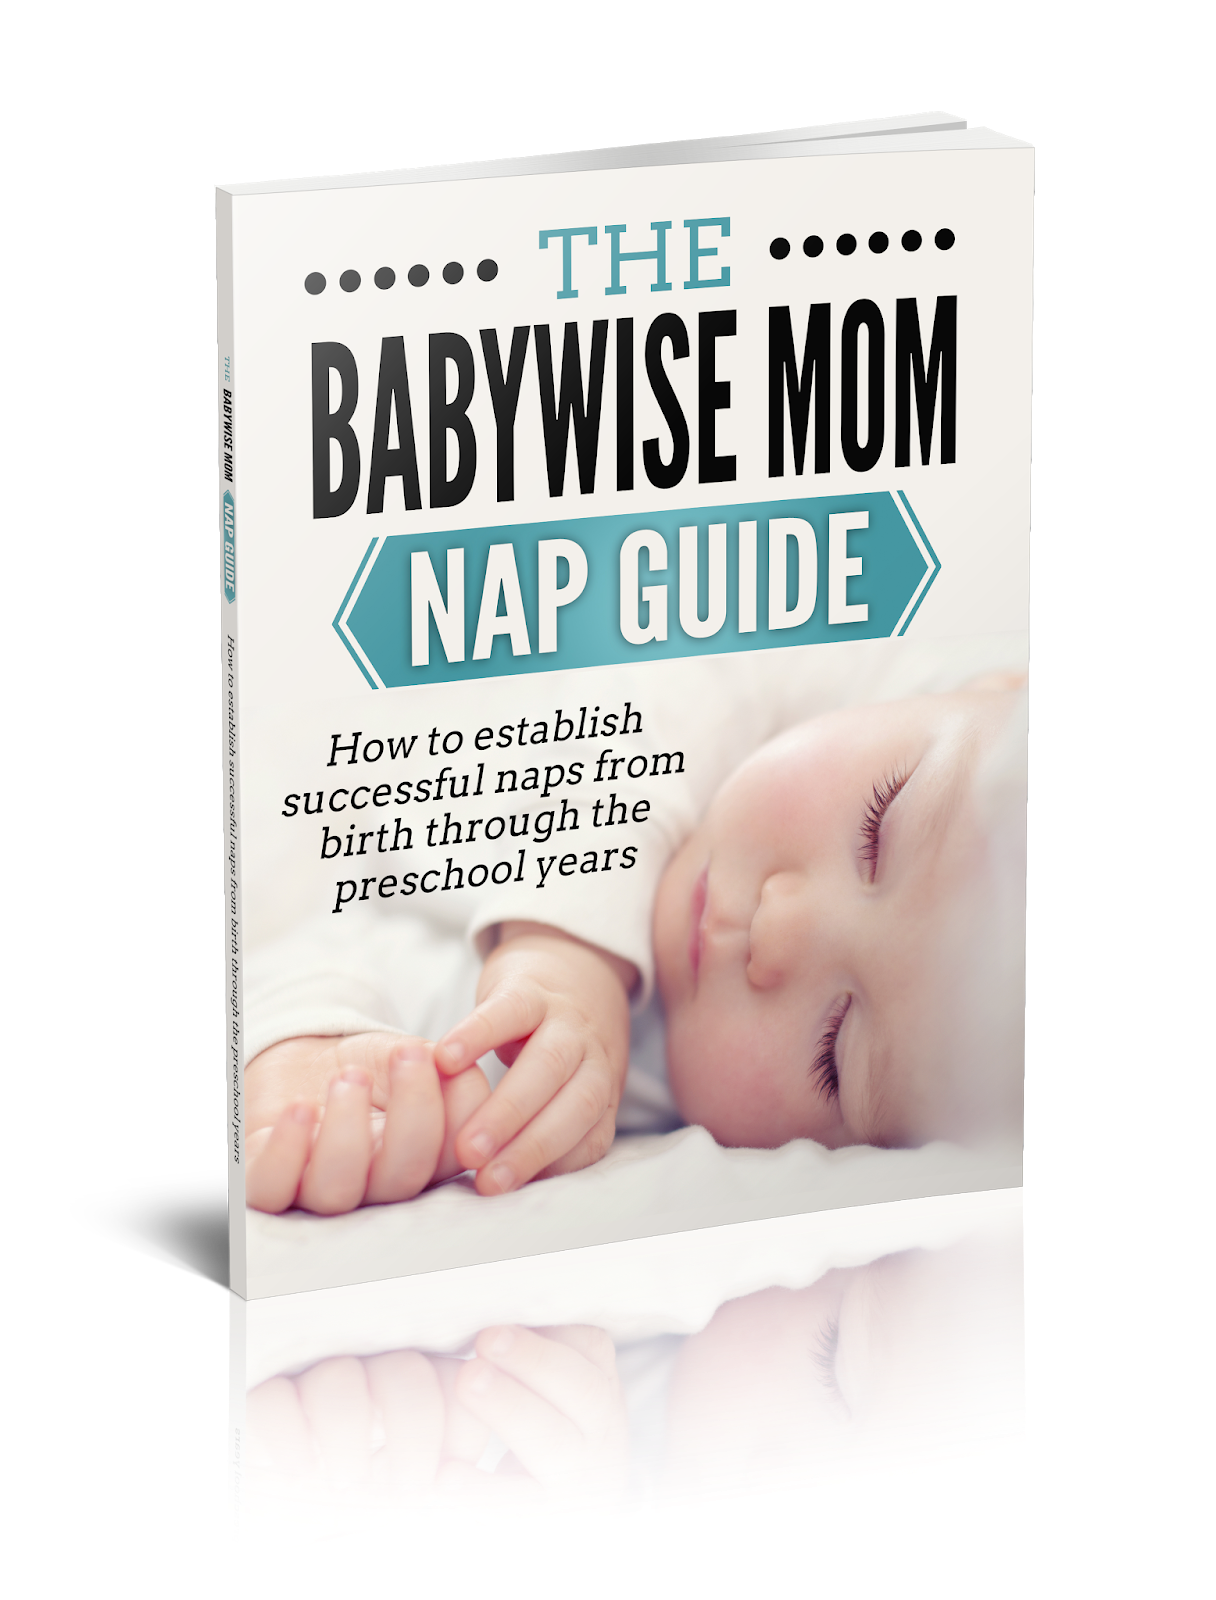  The Babywise Mom Nap Guide